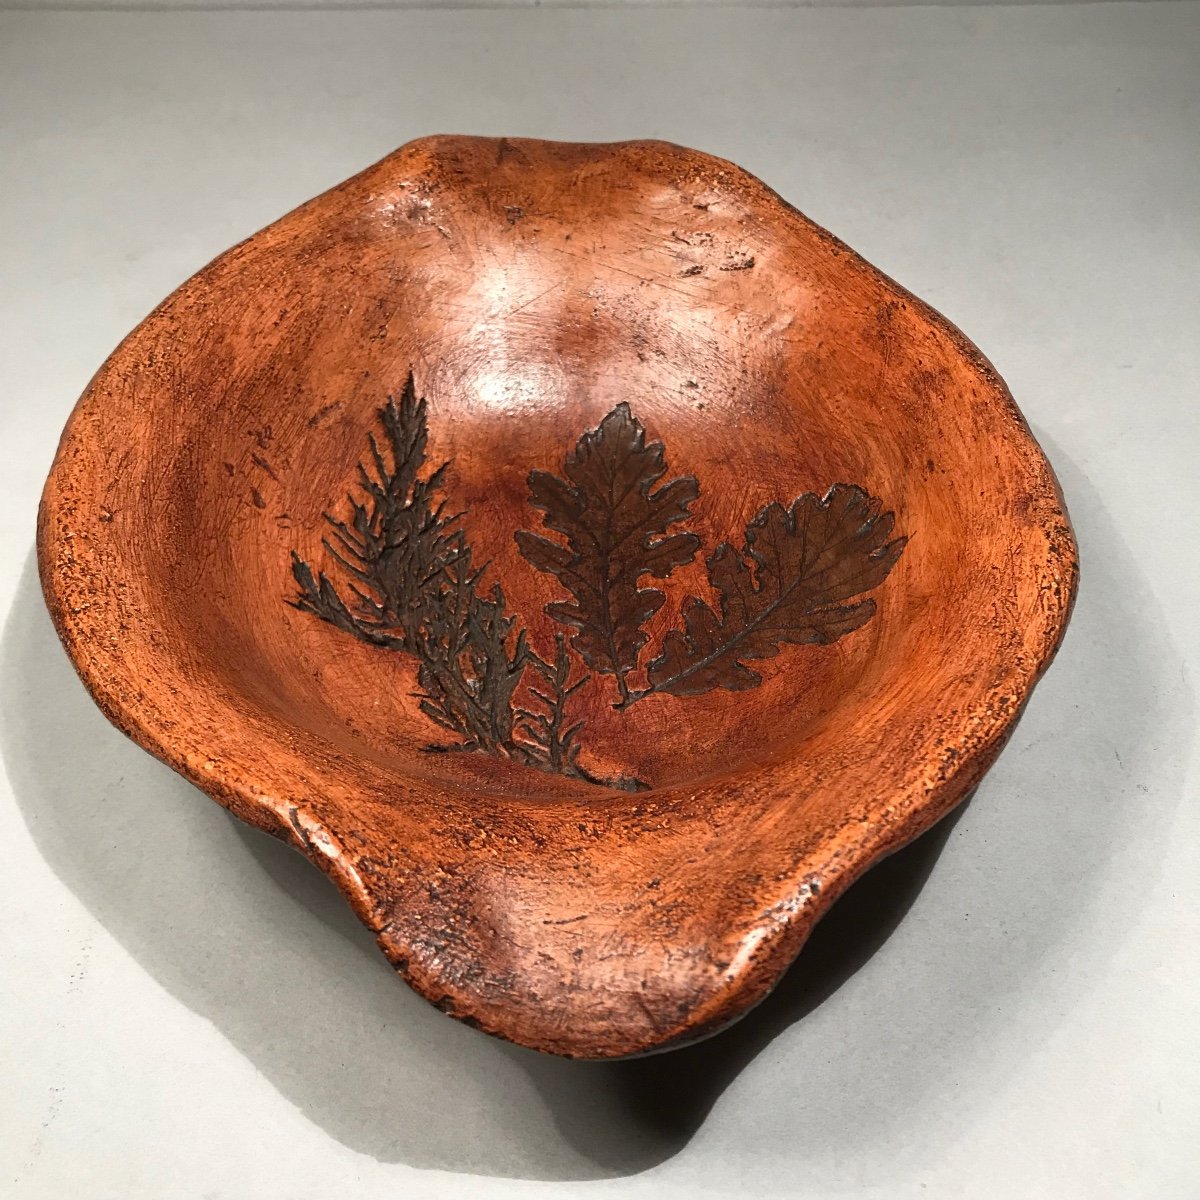 Popular Art Patinated Terracotta Dish With Plant Imprints Early 20th Century Haute-provence-photo-3